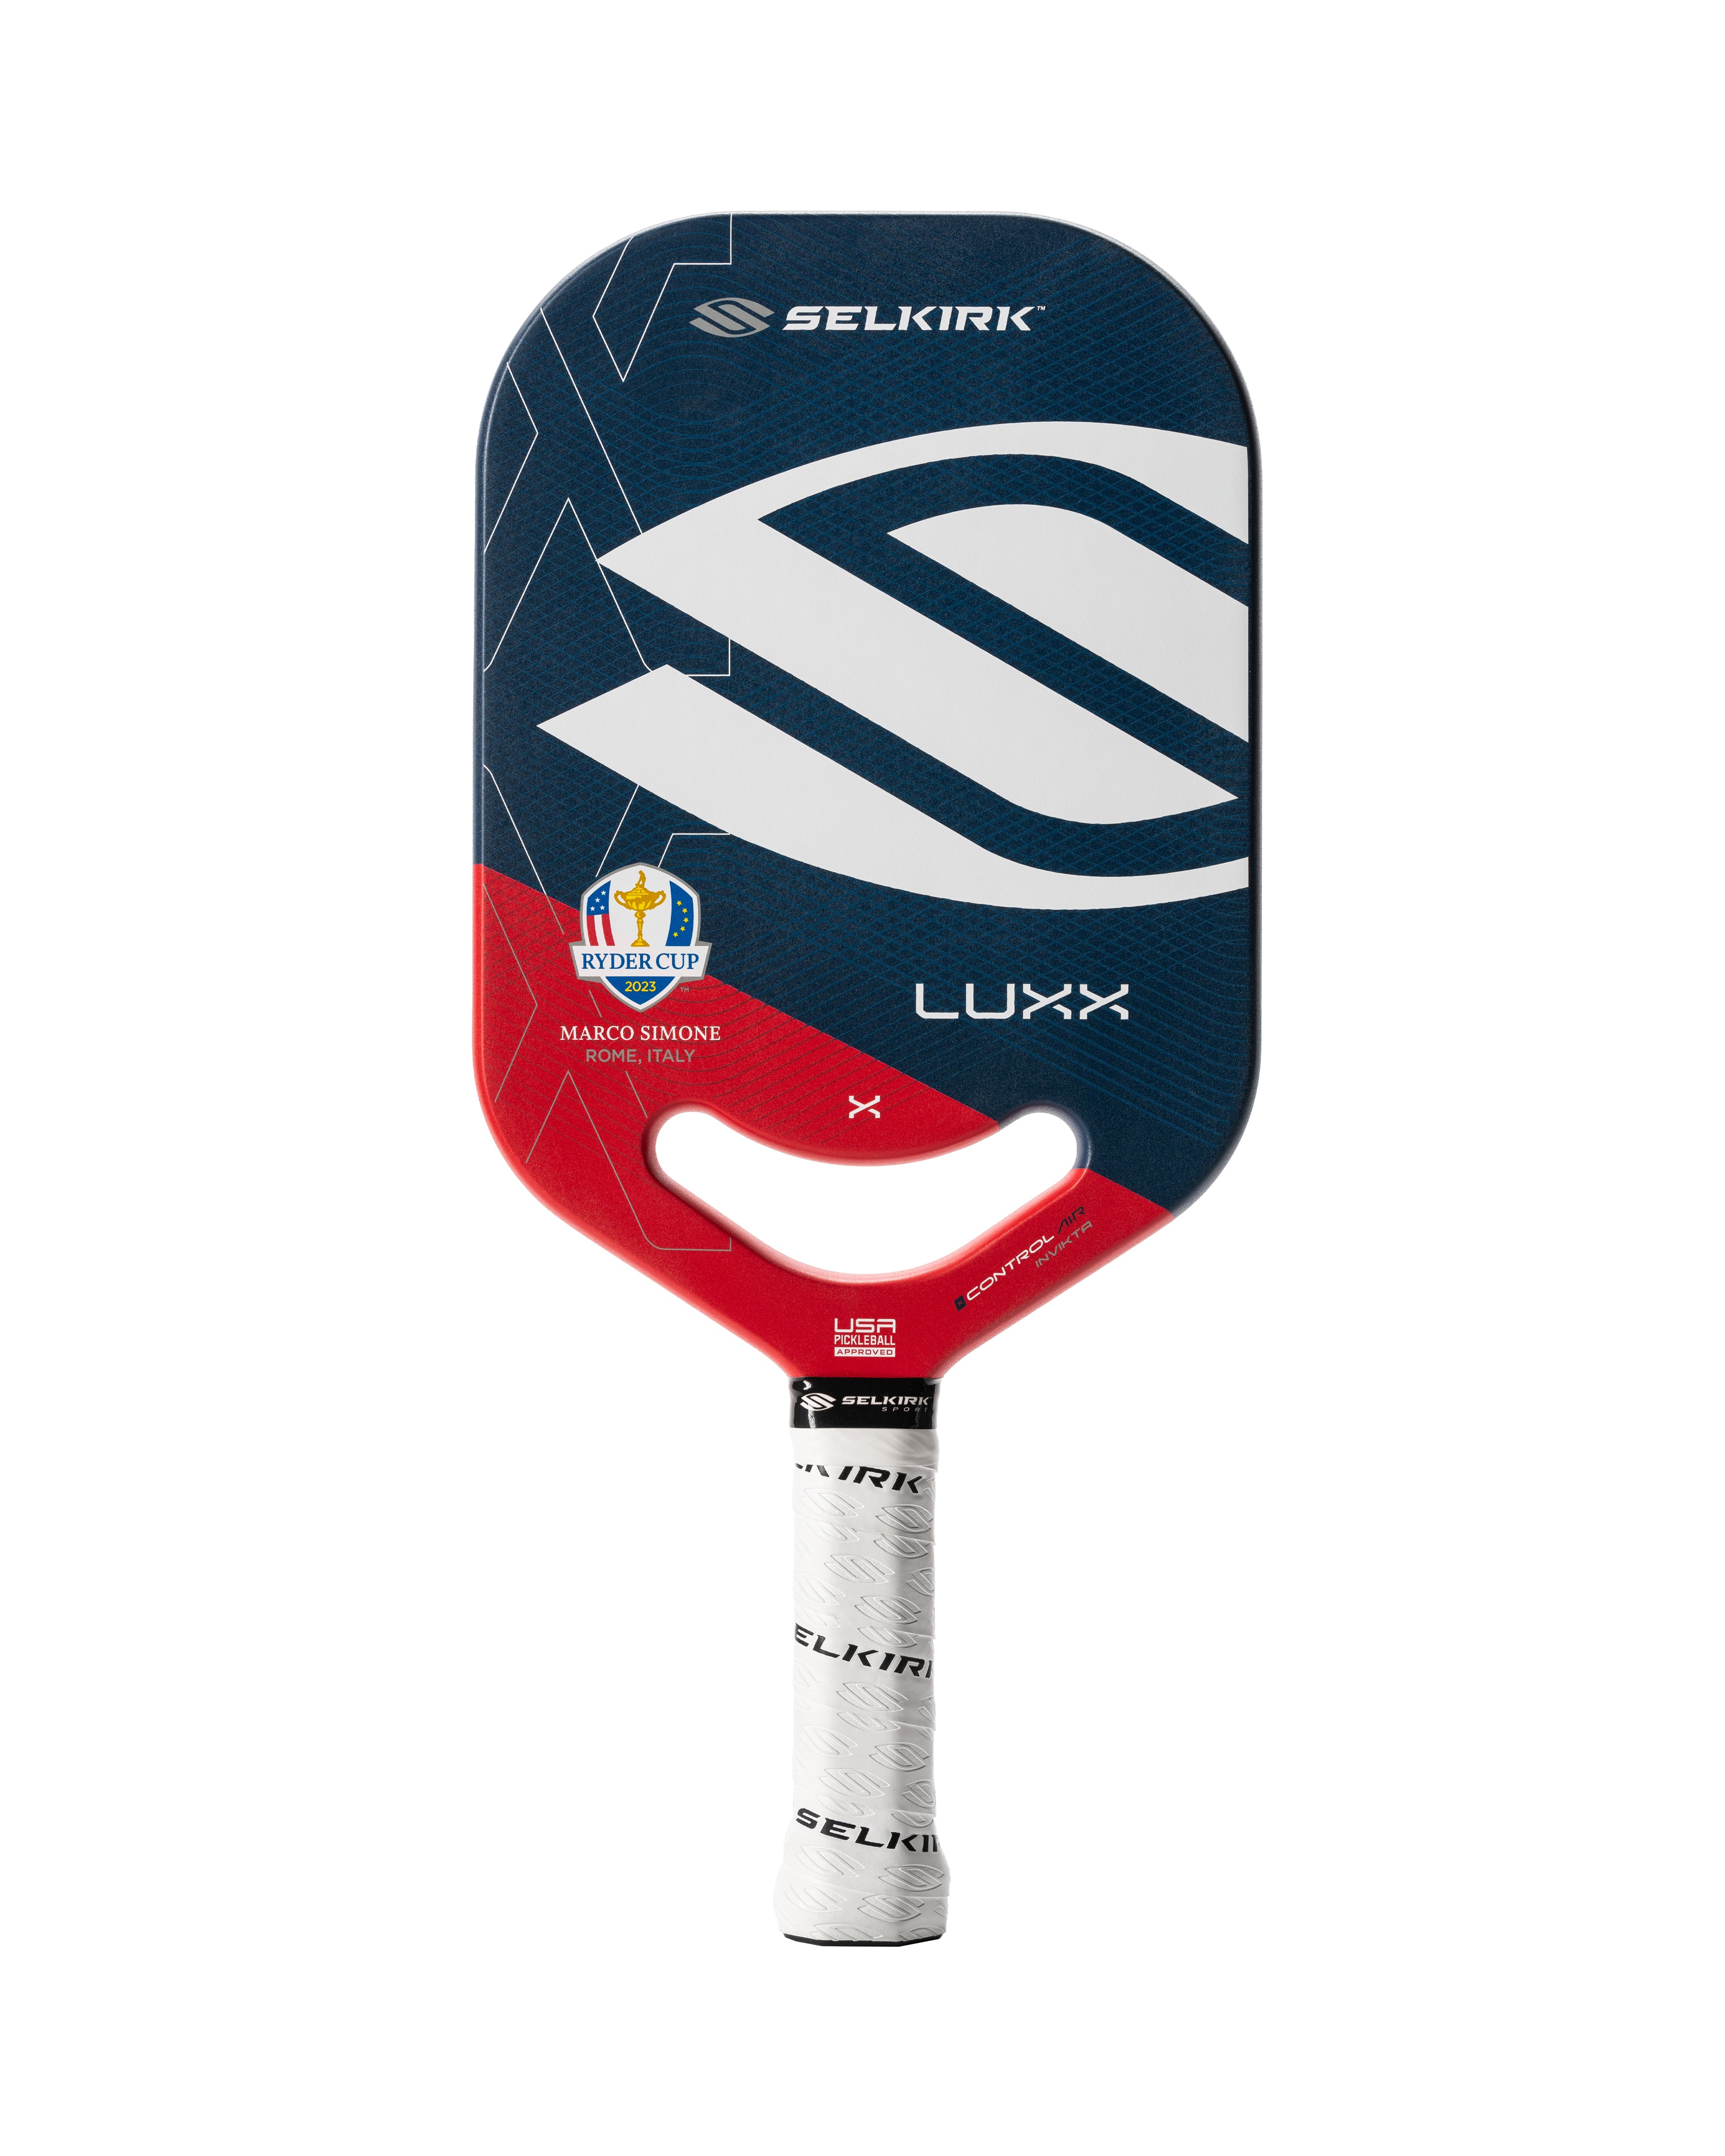 Selkirk Ryder Cup Limited Edition Luxx Control Air - Invikta - Pickleball Paddle